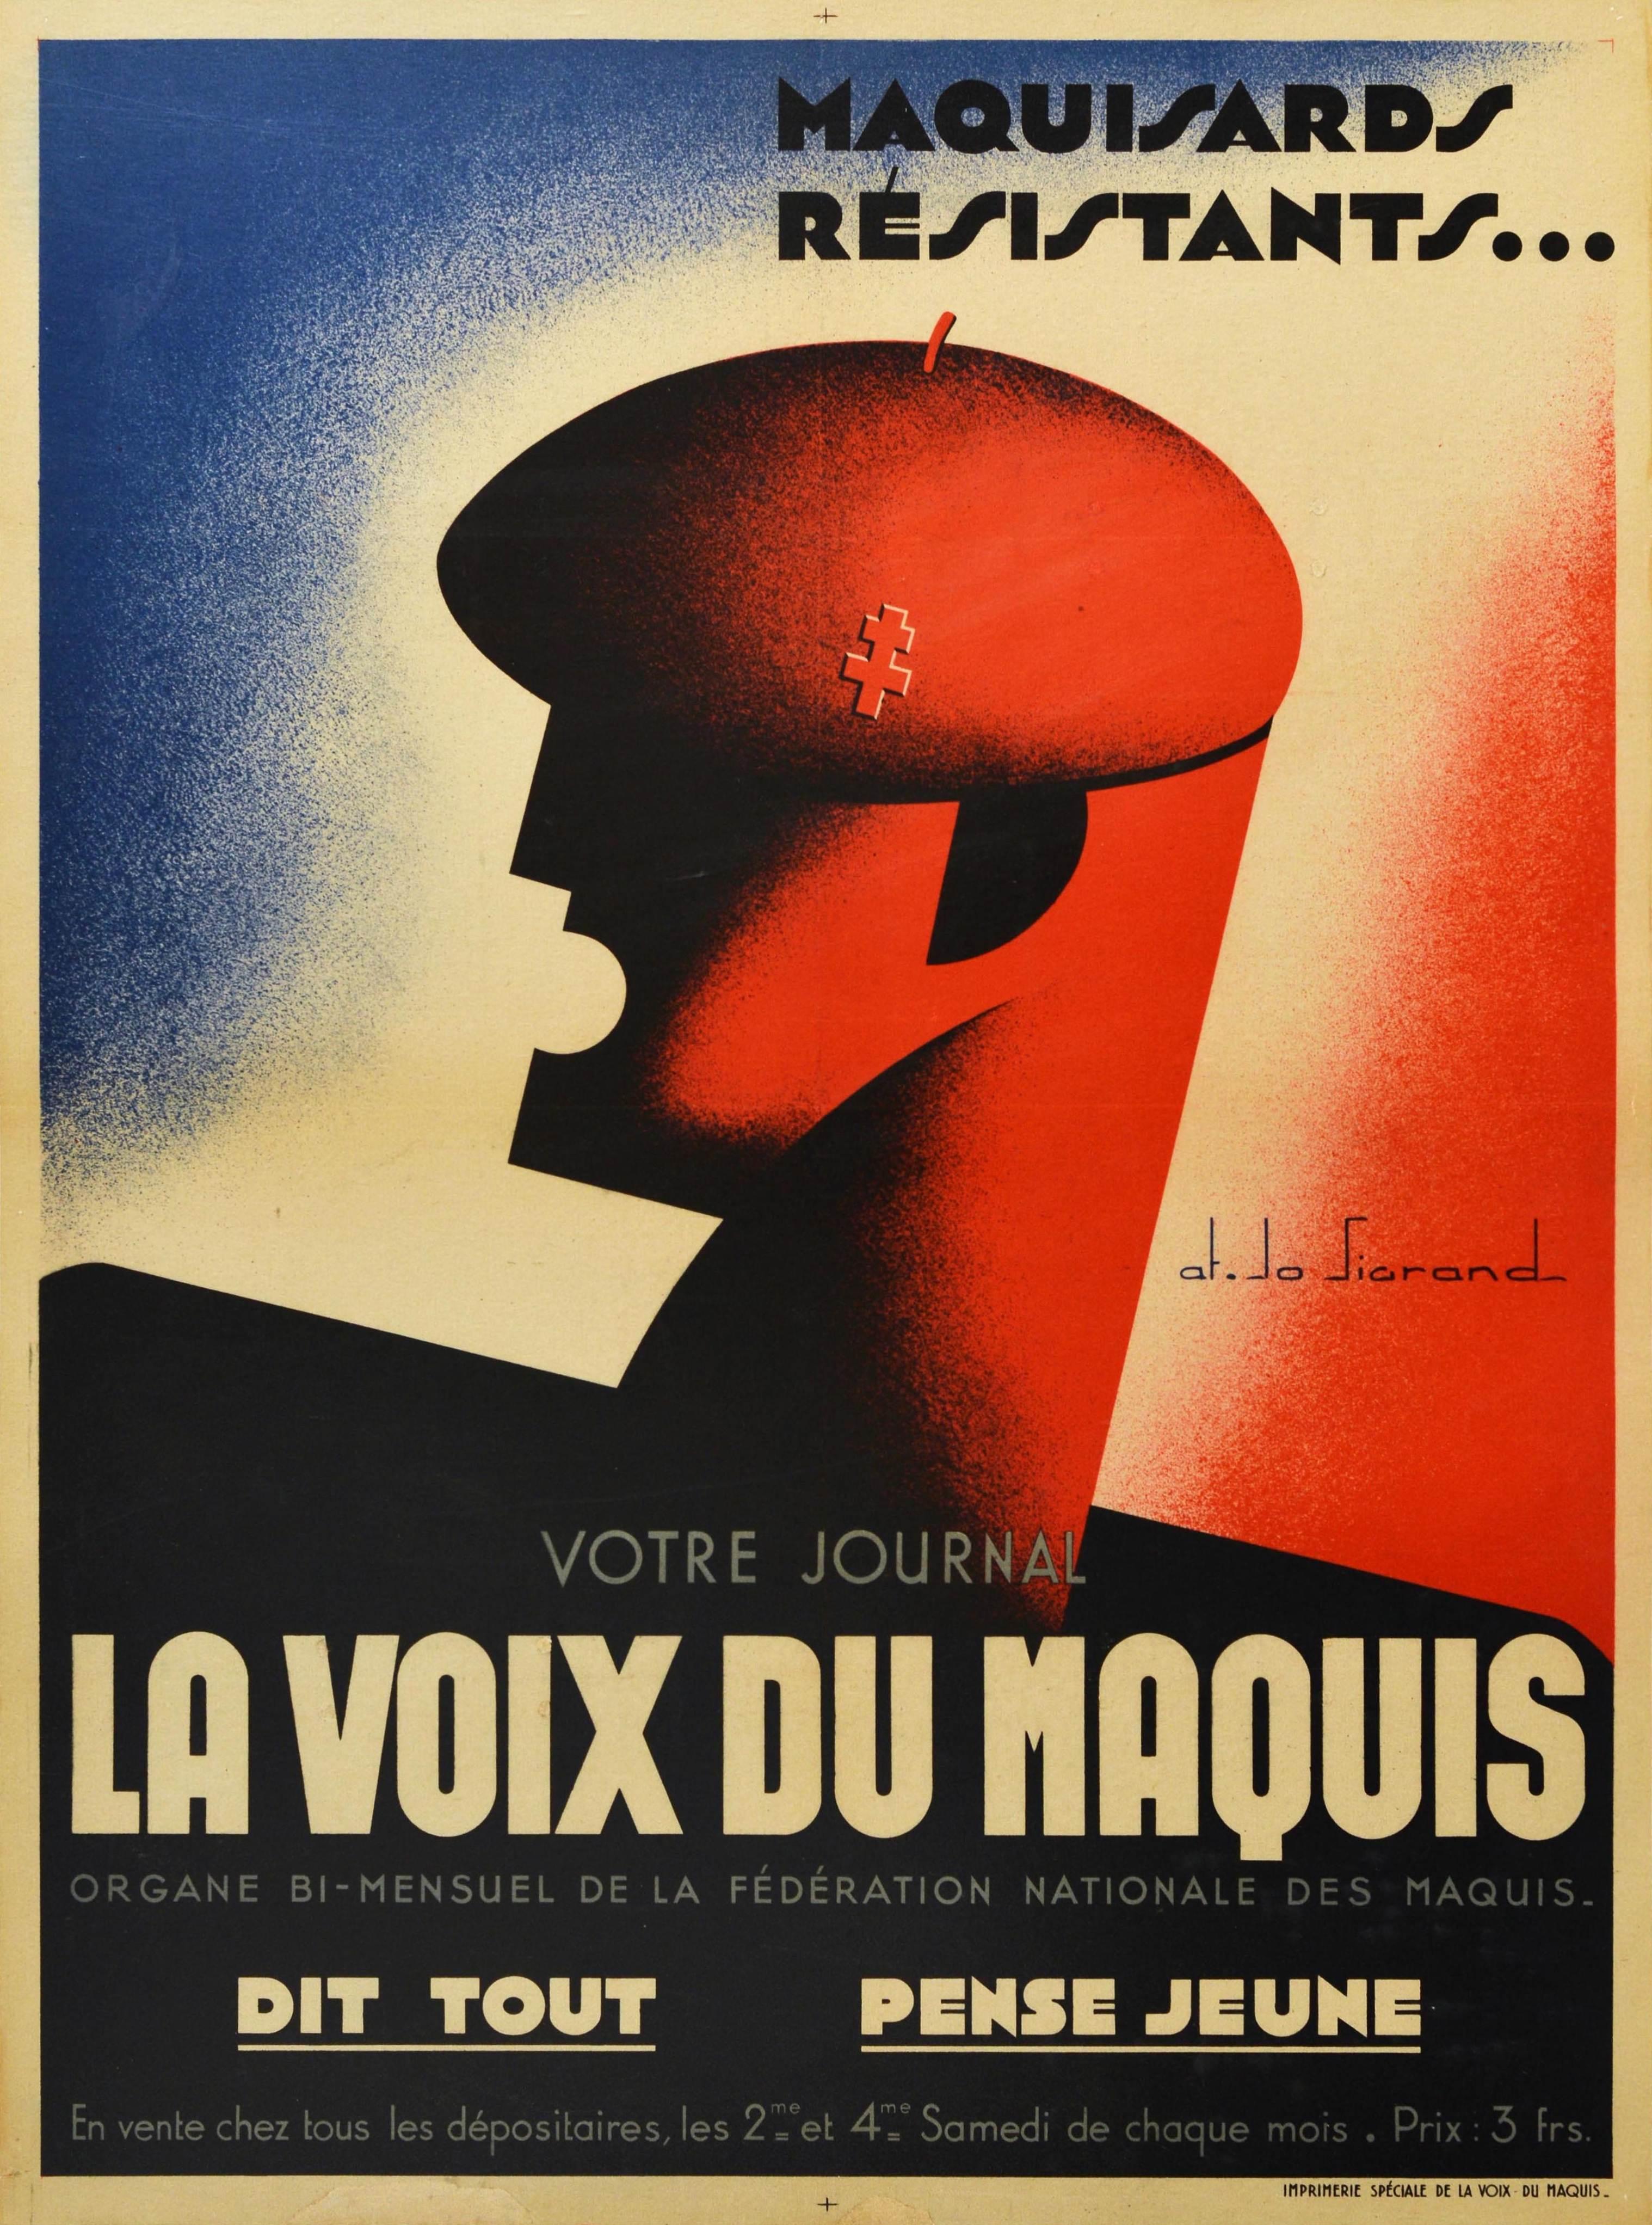 Original vintage World War Two poster advertising La Voix Du Maquis / The Voice of Maquis bi-monthly magazine issued by the National Federation of Maquis featuring a bold Art Deco style illustration of a soldier wearing a beret hat with a logo on it